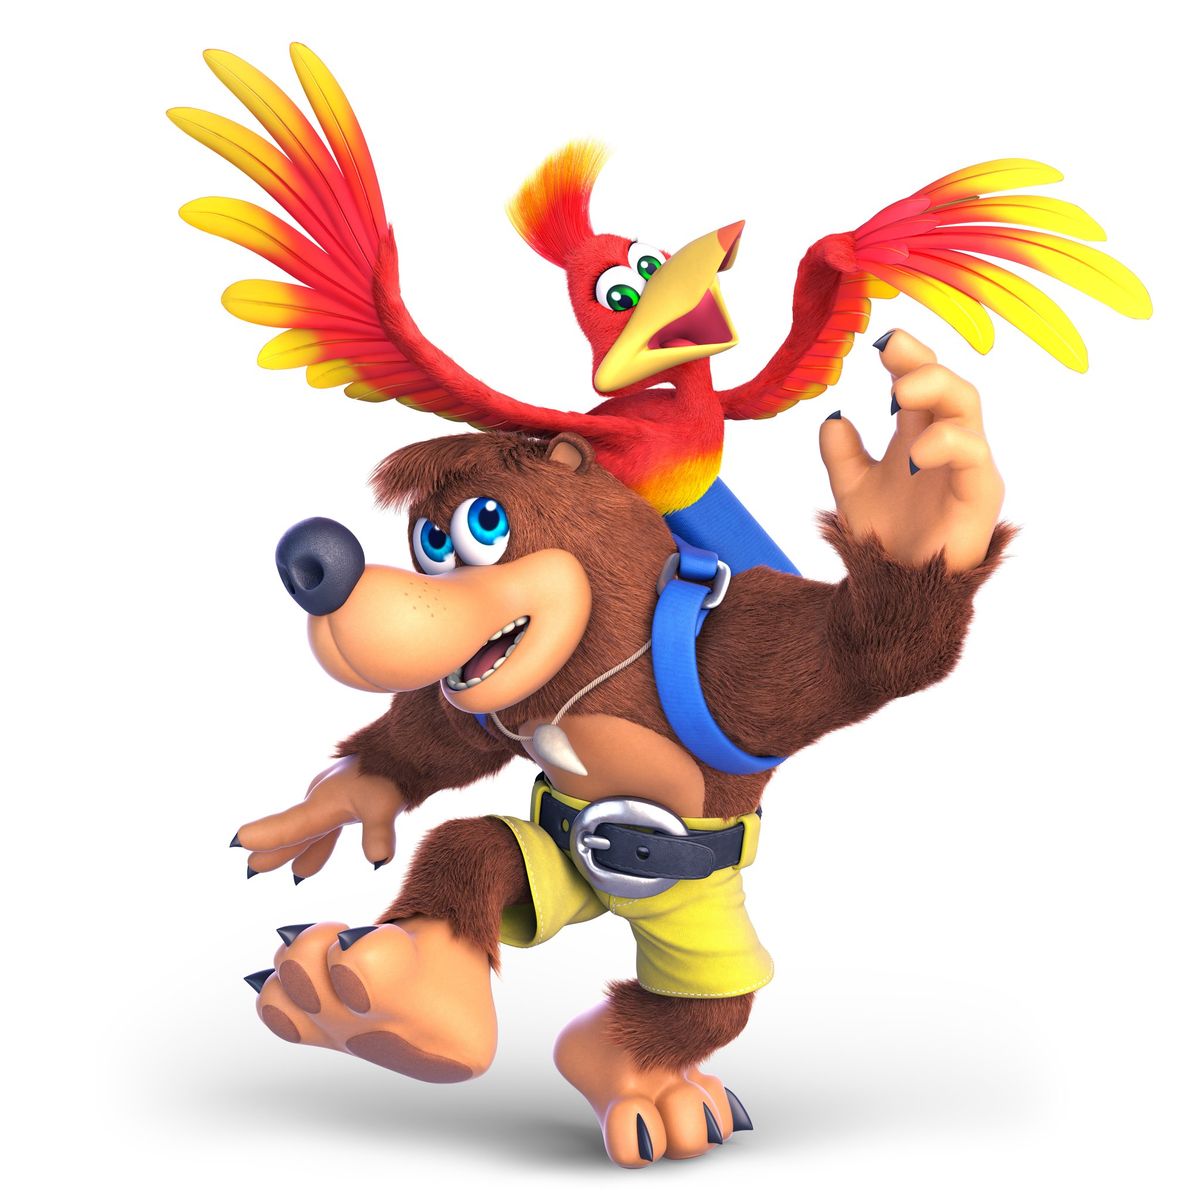 How to counter Banjo And Kazooie with Lucas in Super Smash Bros. Ultimate